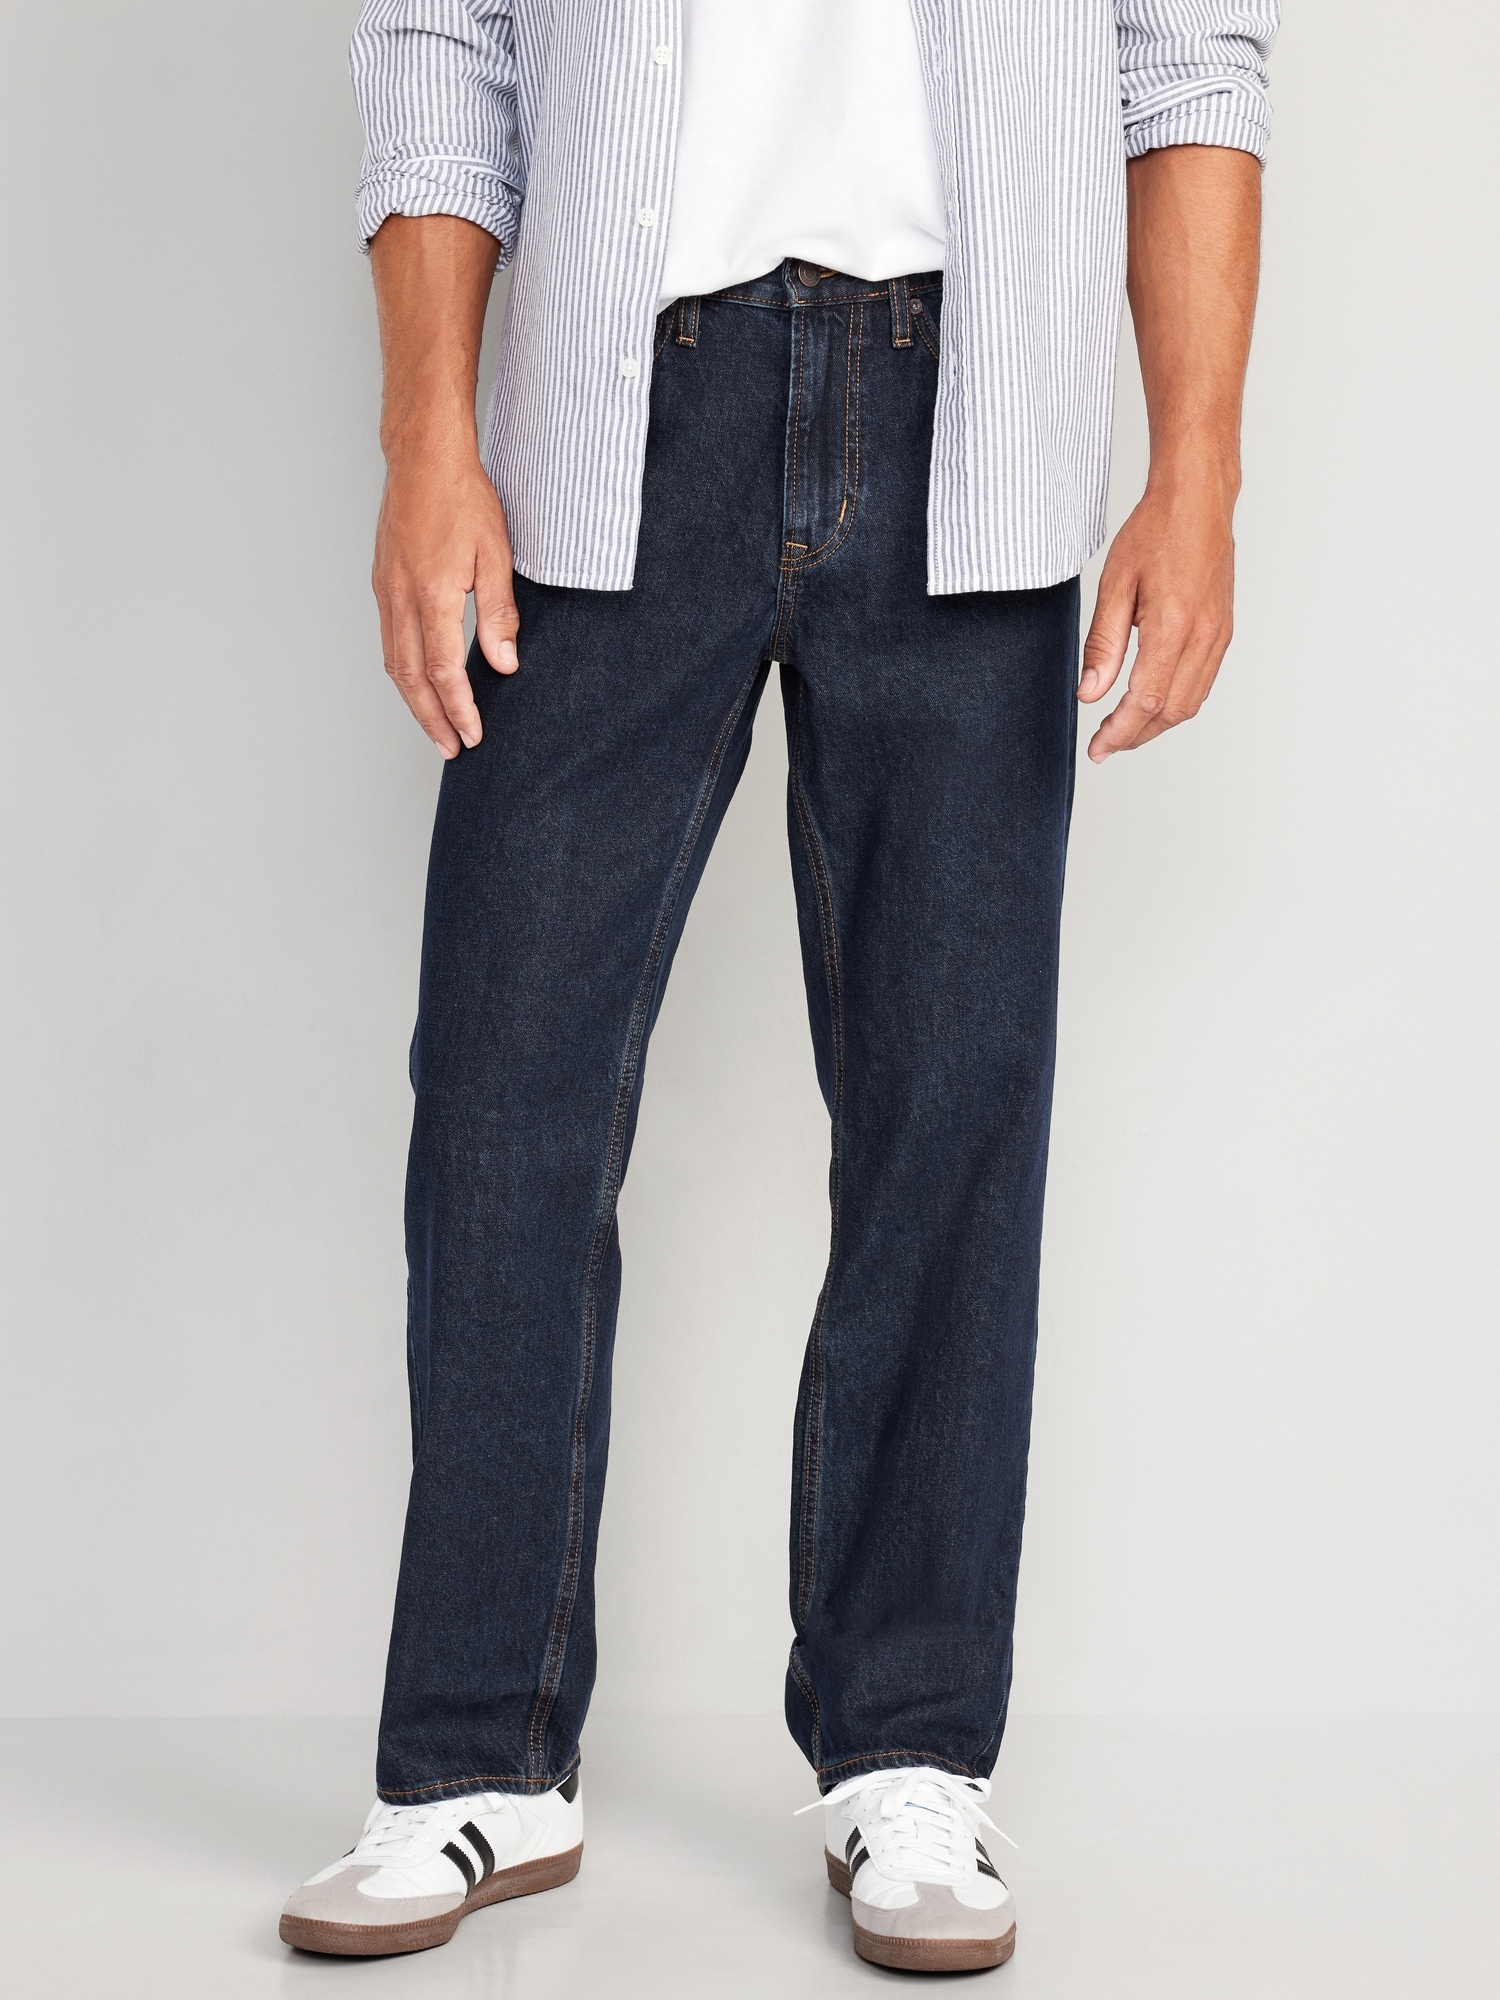 Old Navy Wow Loose Twill Five-Pocket Pants for Men